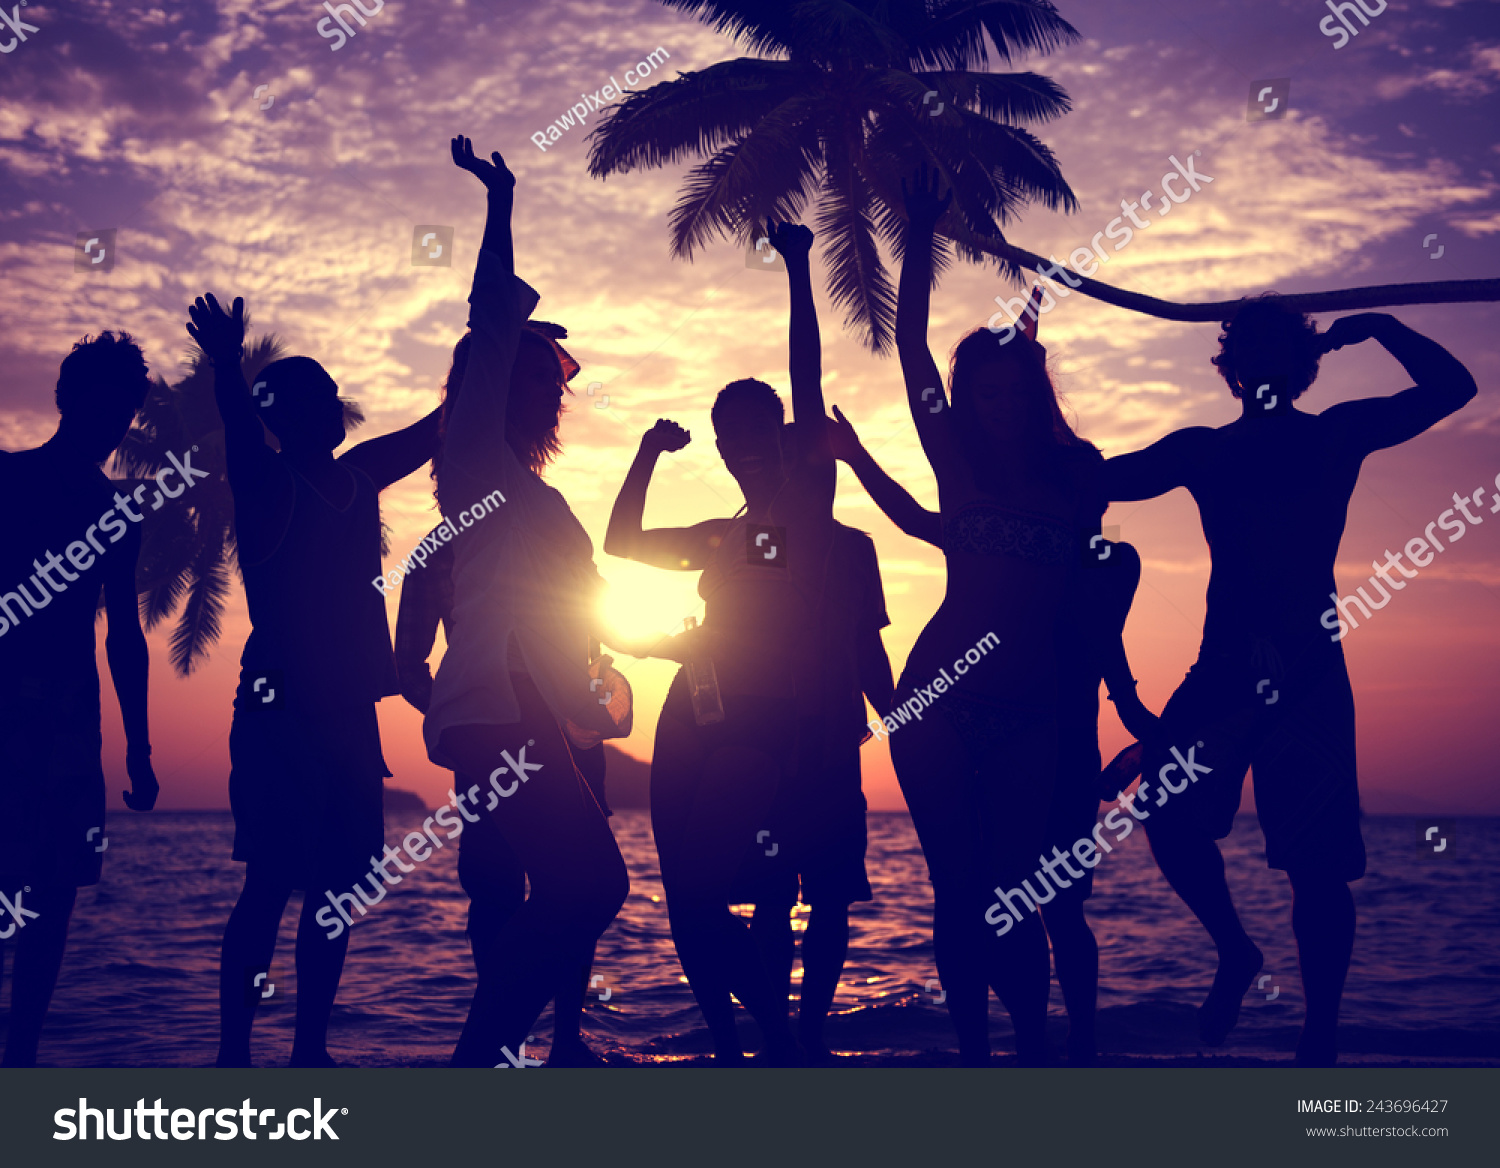 People Celebration Beach Party Summer Holiday Stock Photo 243696427 ...